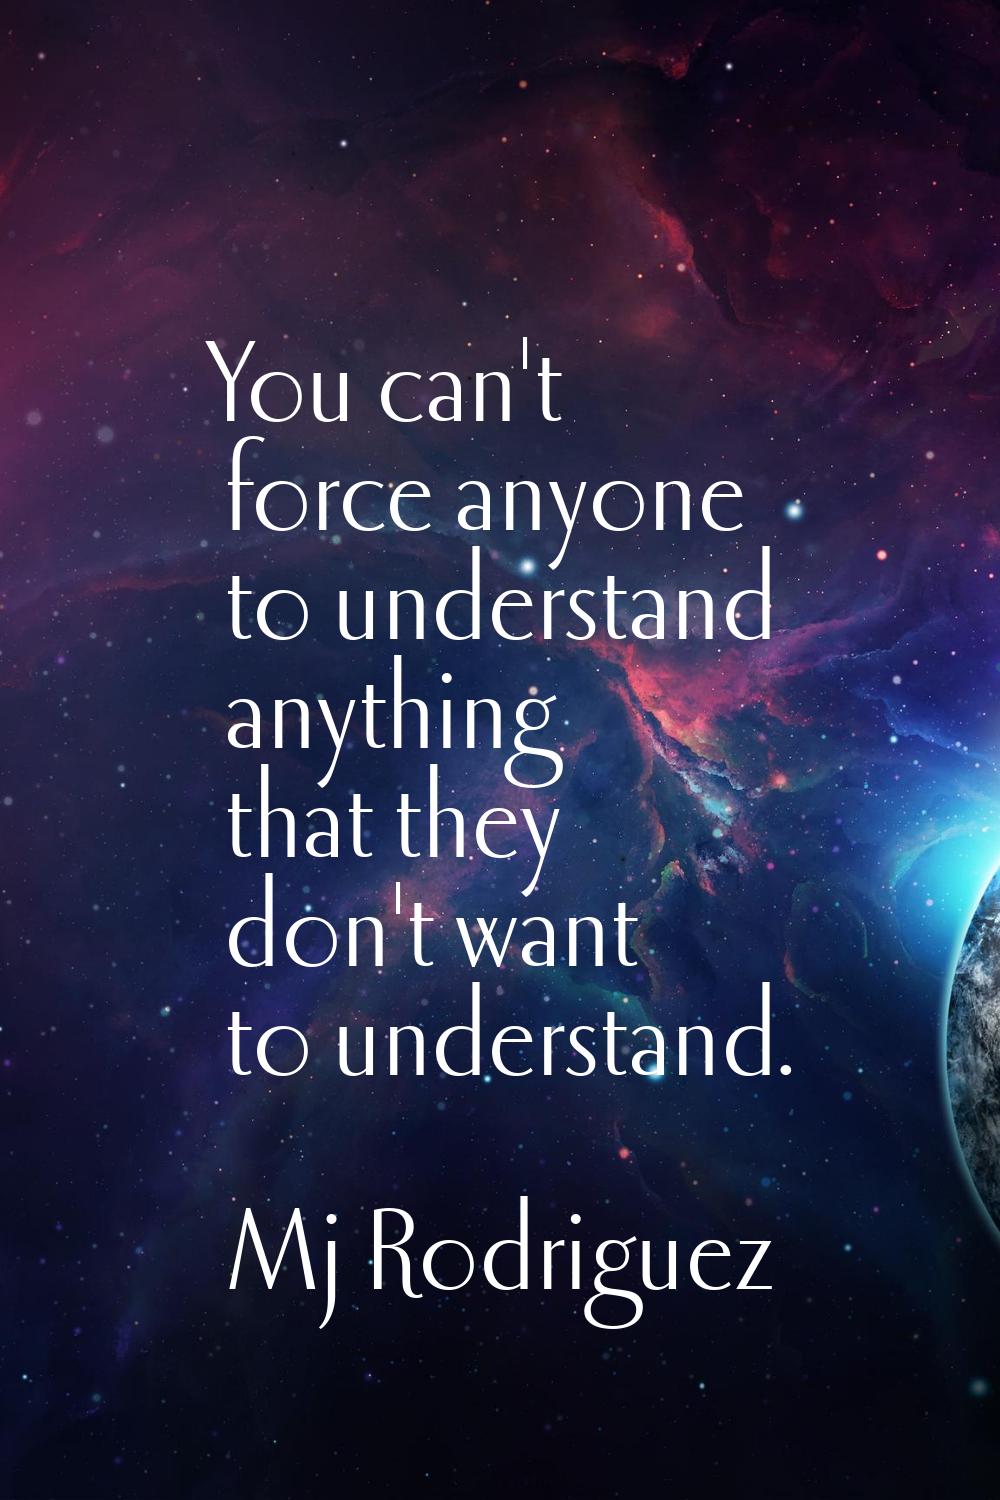 You can't force anyone to understand anything that they don't want to understand.